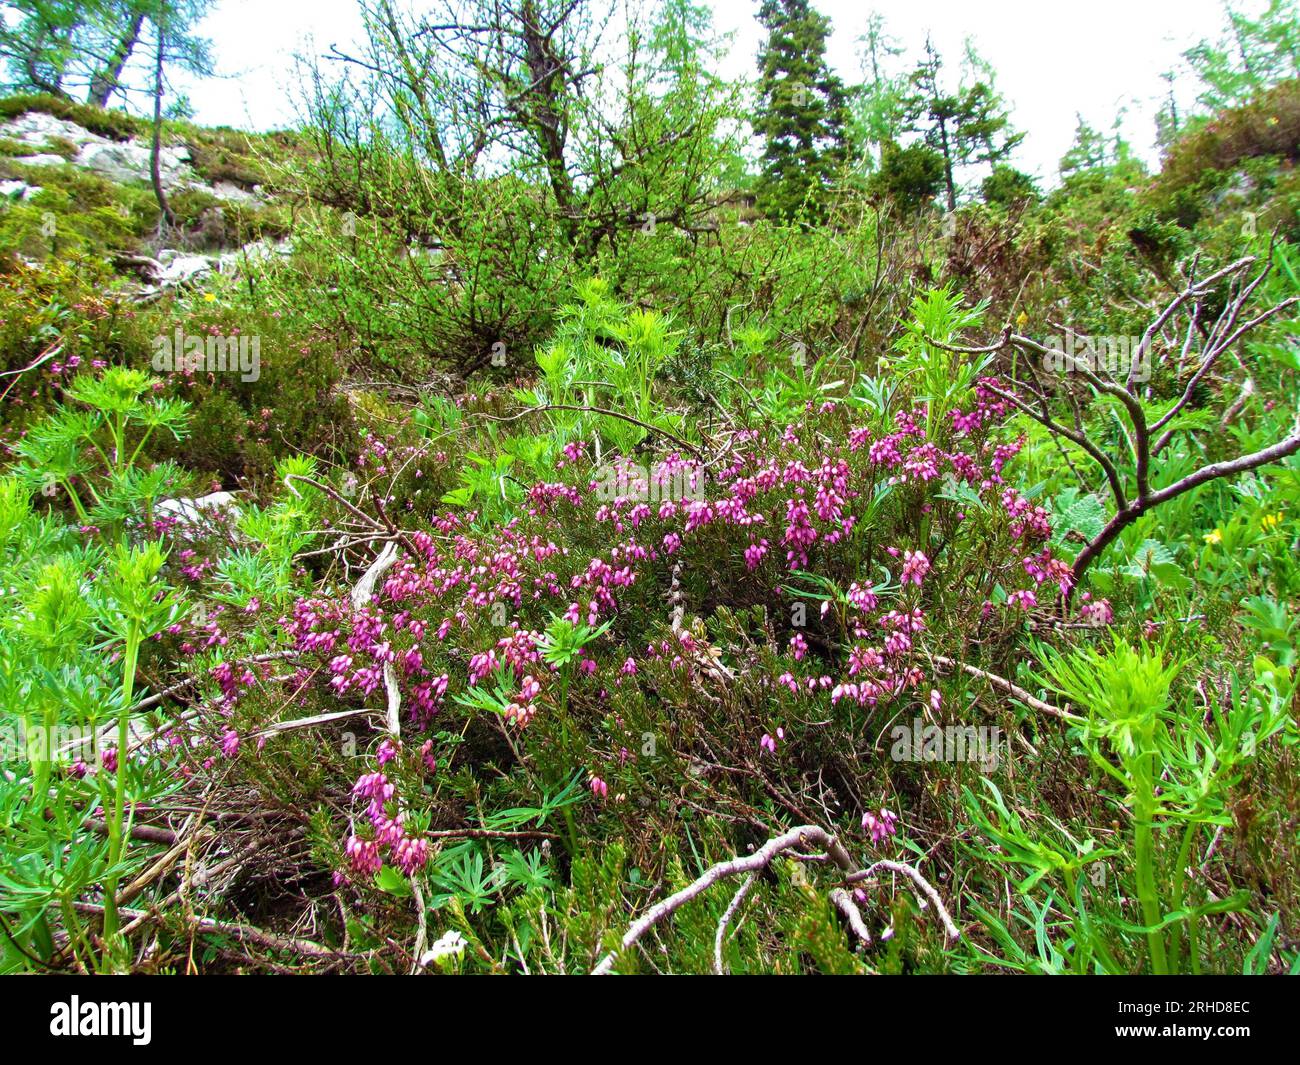 Pink winter heath (Erica carnea) flowers and other bright green spring plants Stock Photo